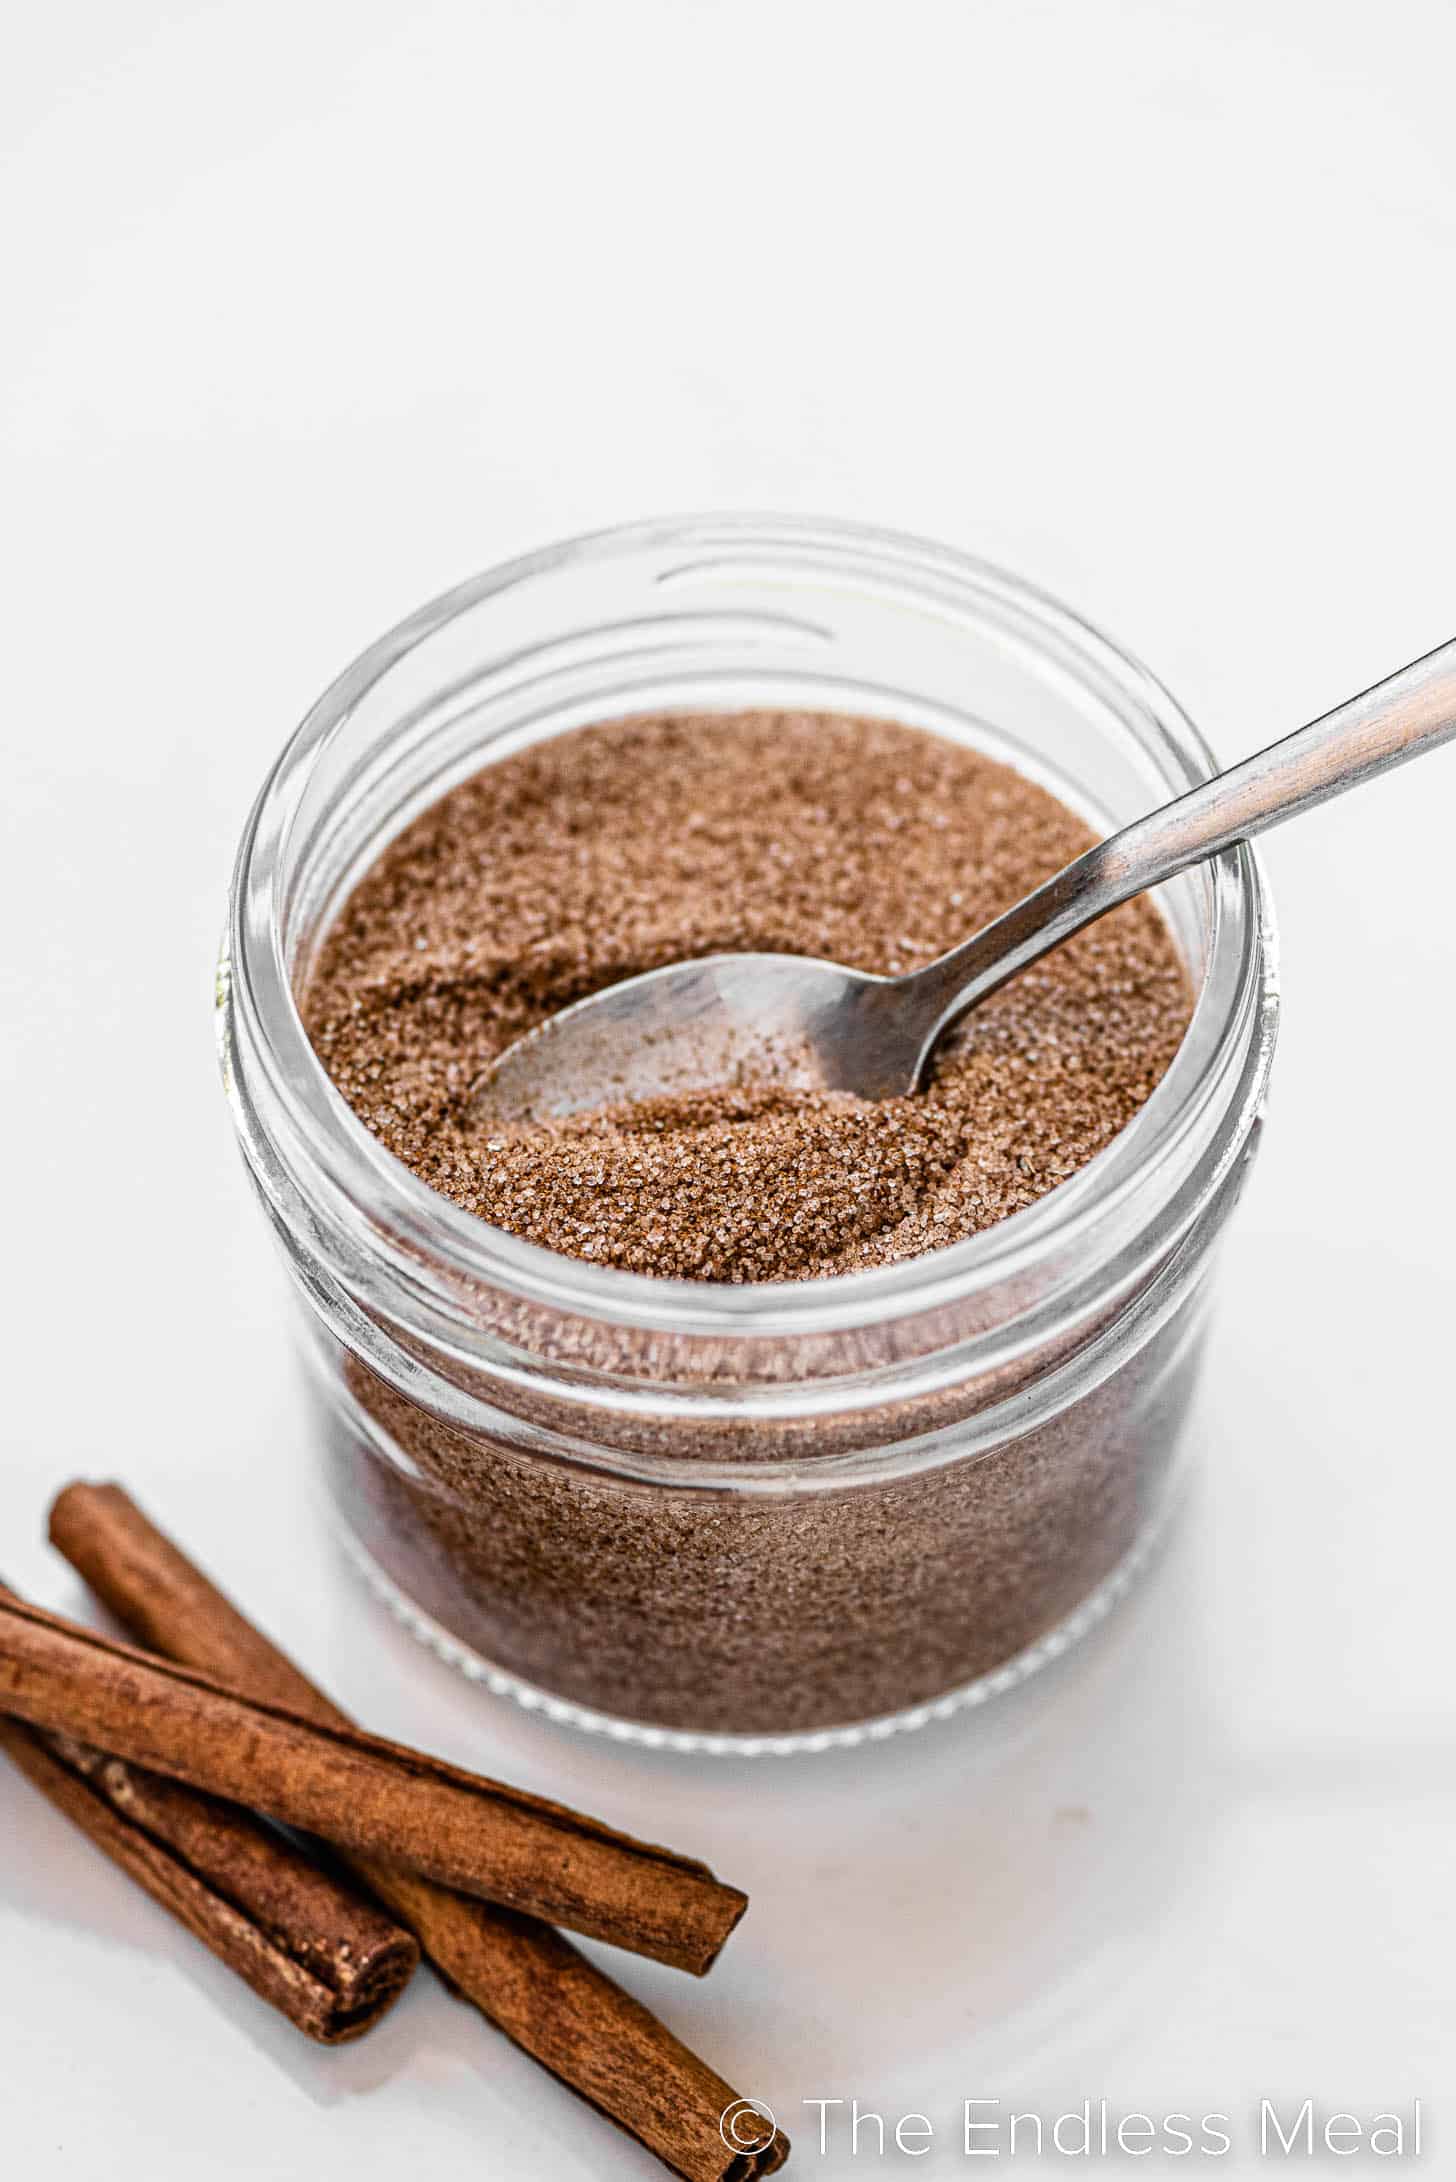 a spoon scooping some cinnamon sugar out of a jar.